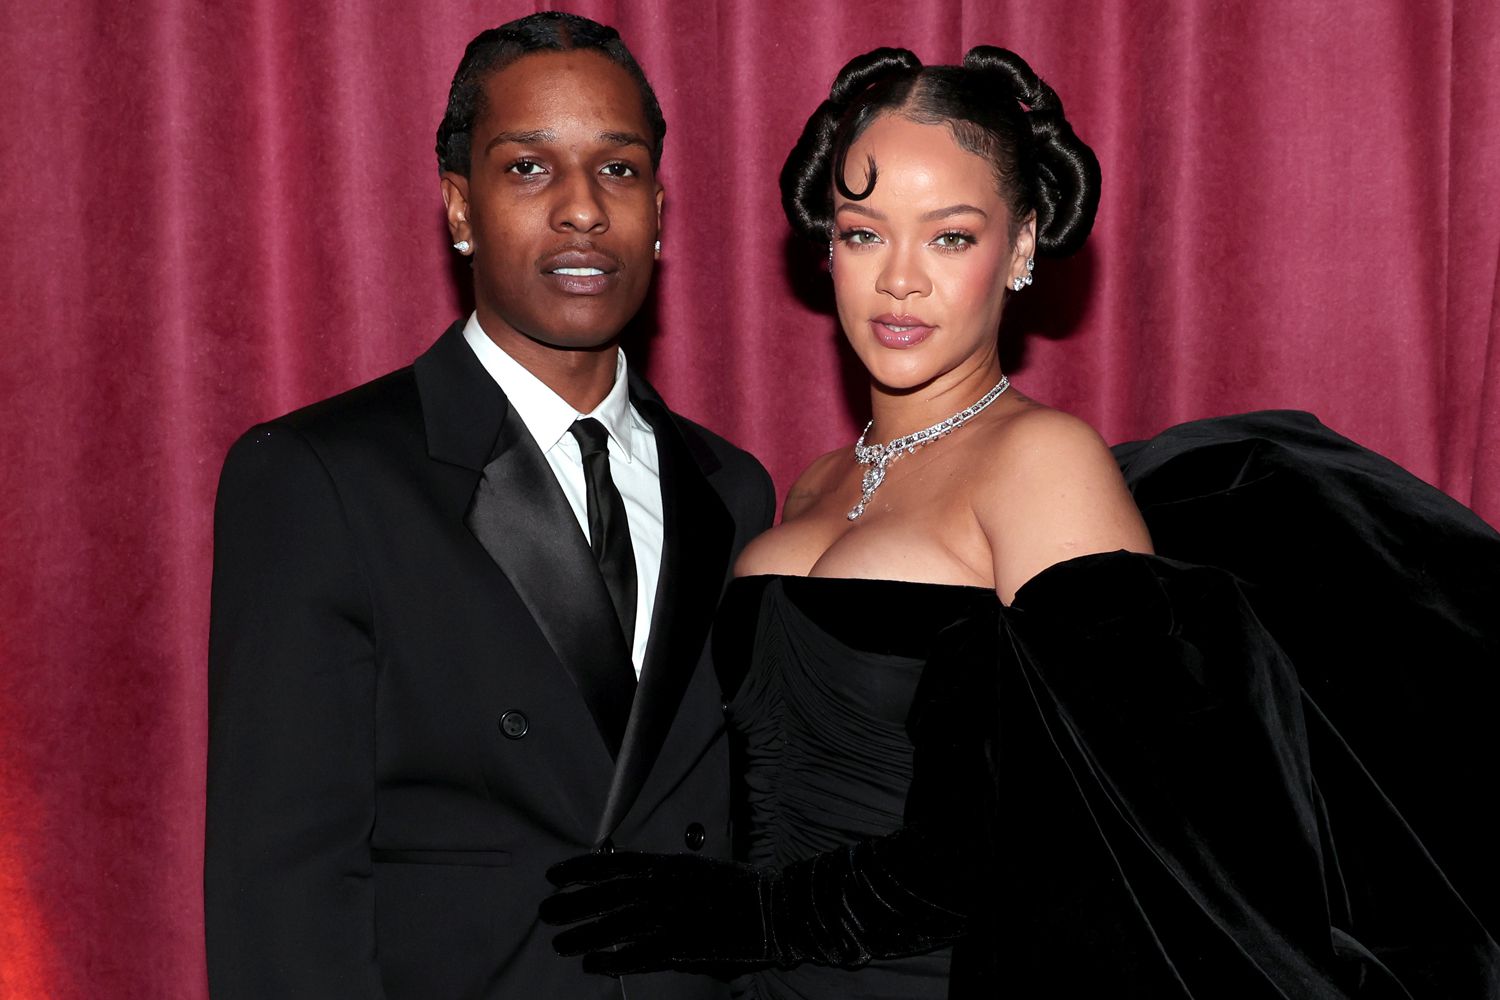 Rihanna Husband: Is The American Singer Married?